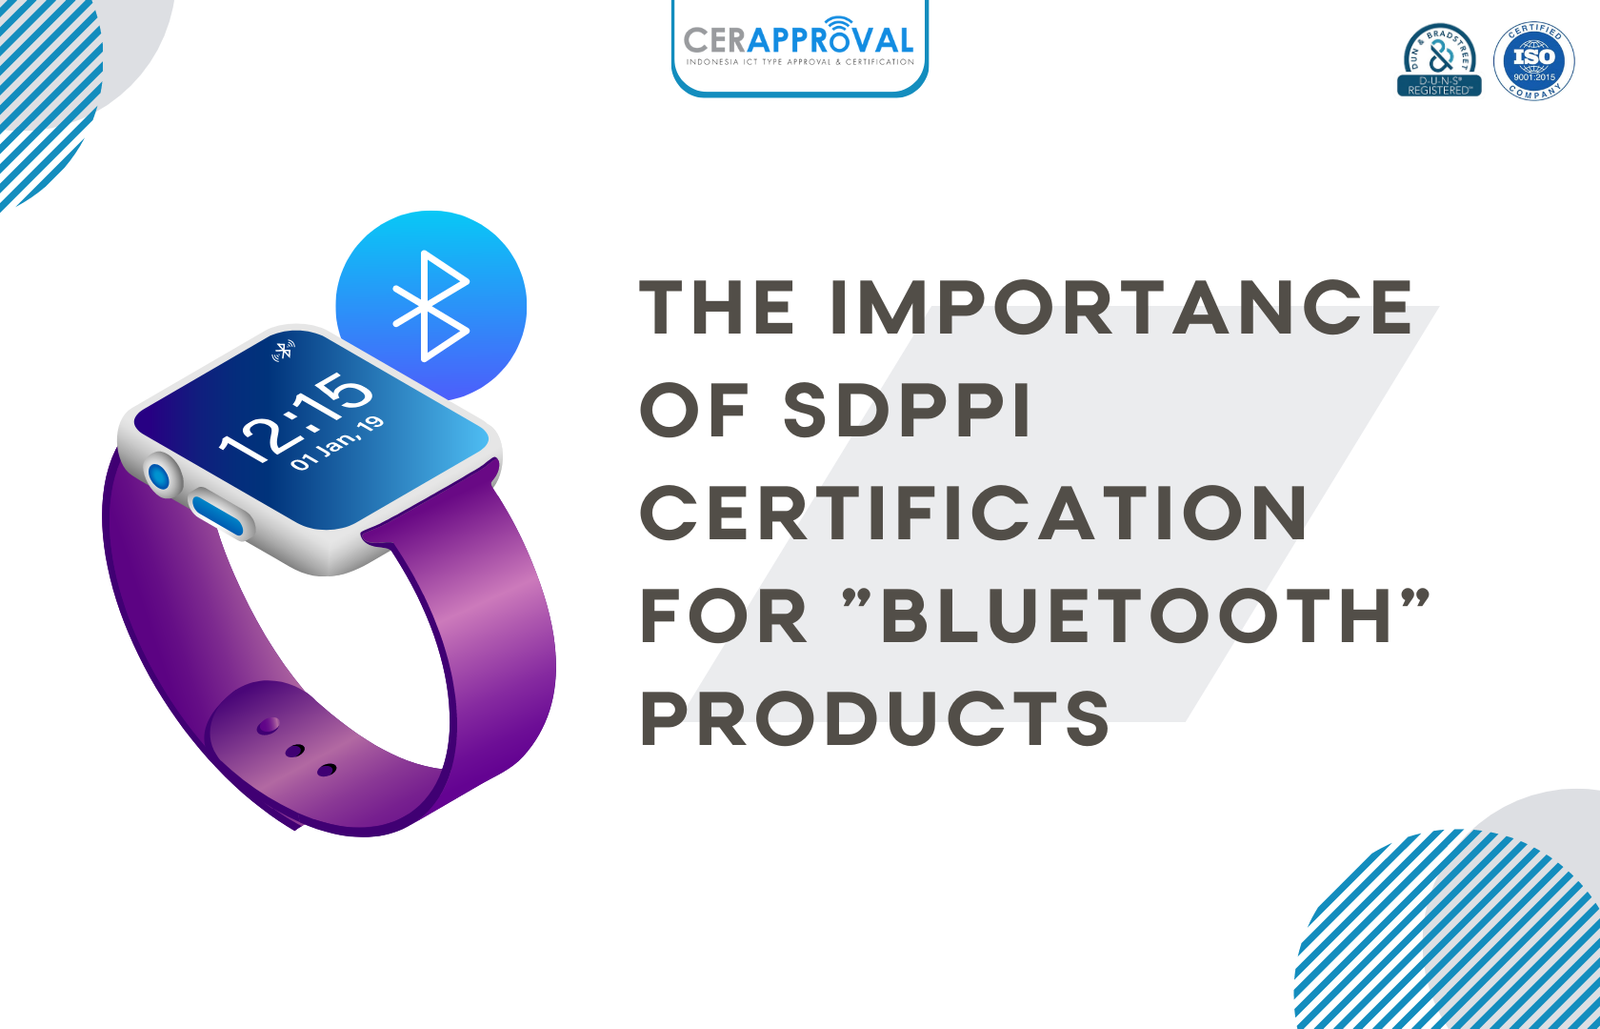 THE IMPORTANCE OF SDPPI CERTIFICATION FOR “BLUETOOTH” PRODUCTS